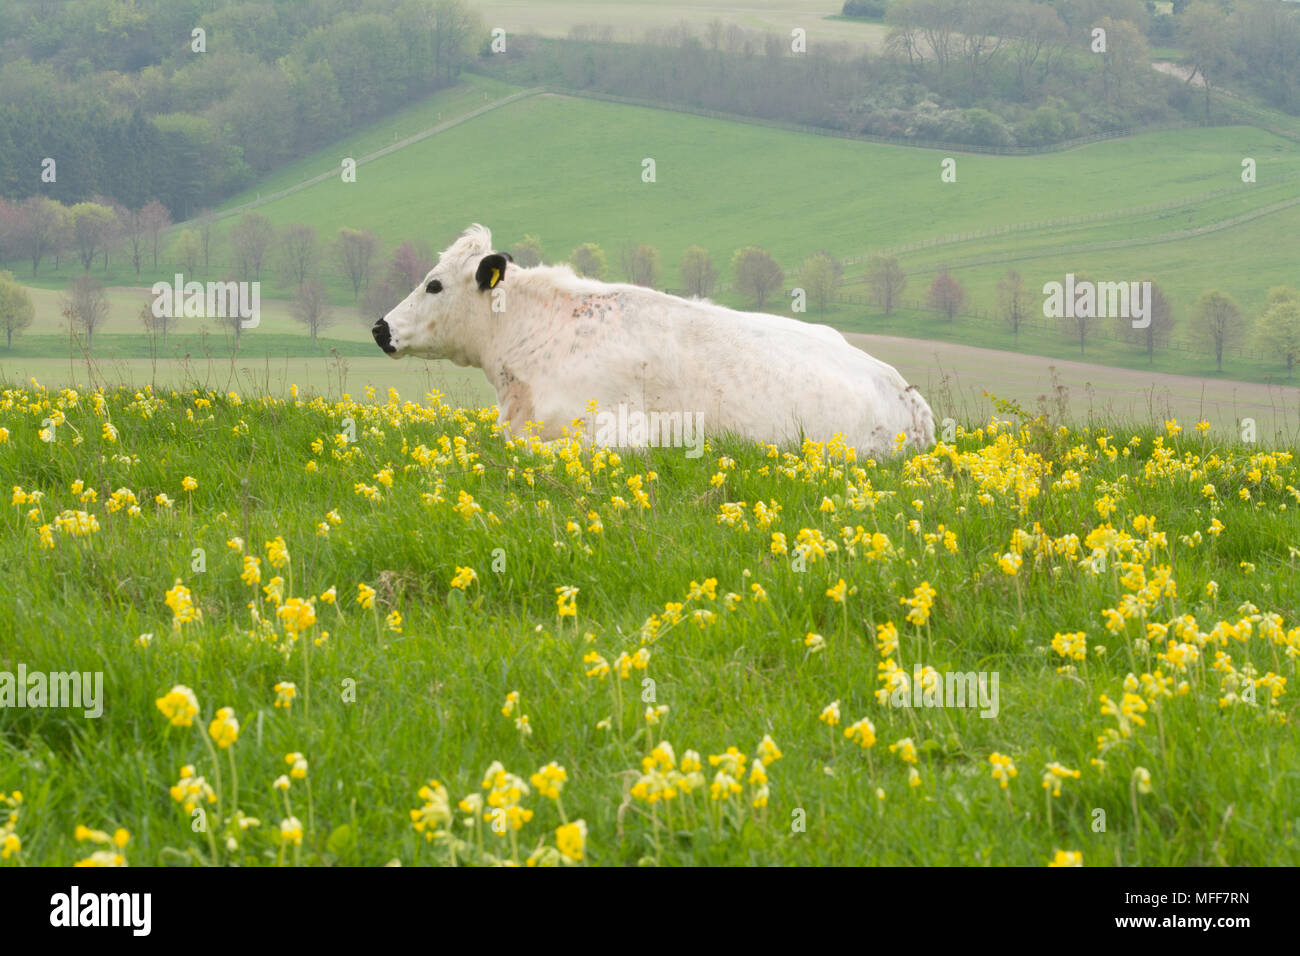 British white cow in a field of cowslips at Magdalen Hill Down Butterfly Conservation nature reserve in the South Downs National Park, Hampshire, UK Stock Photo